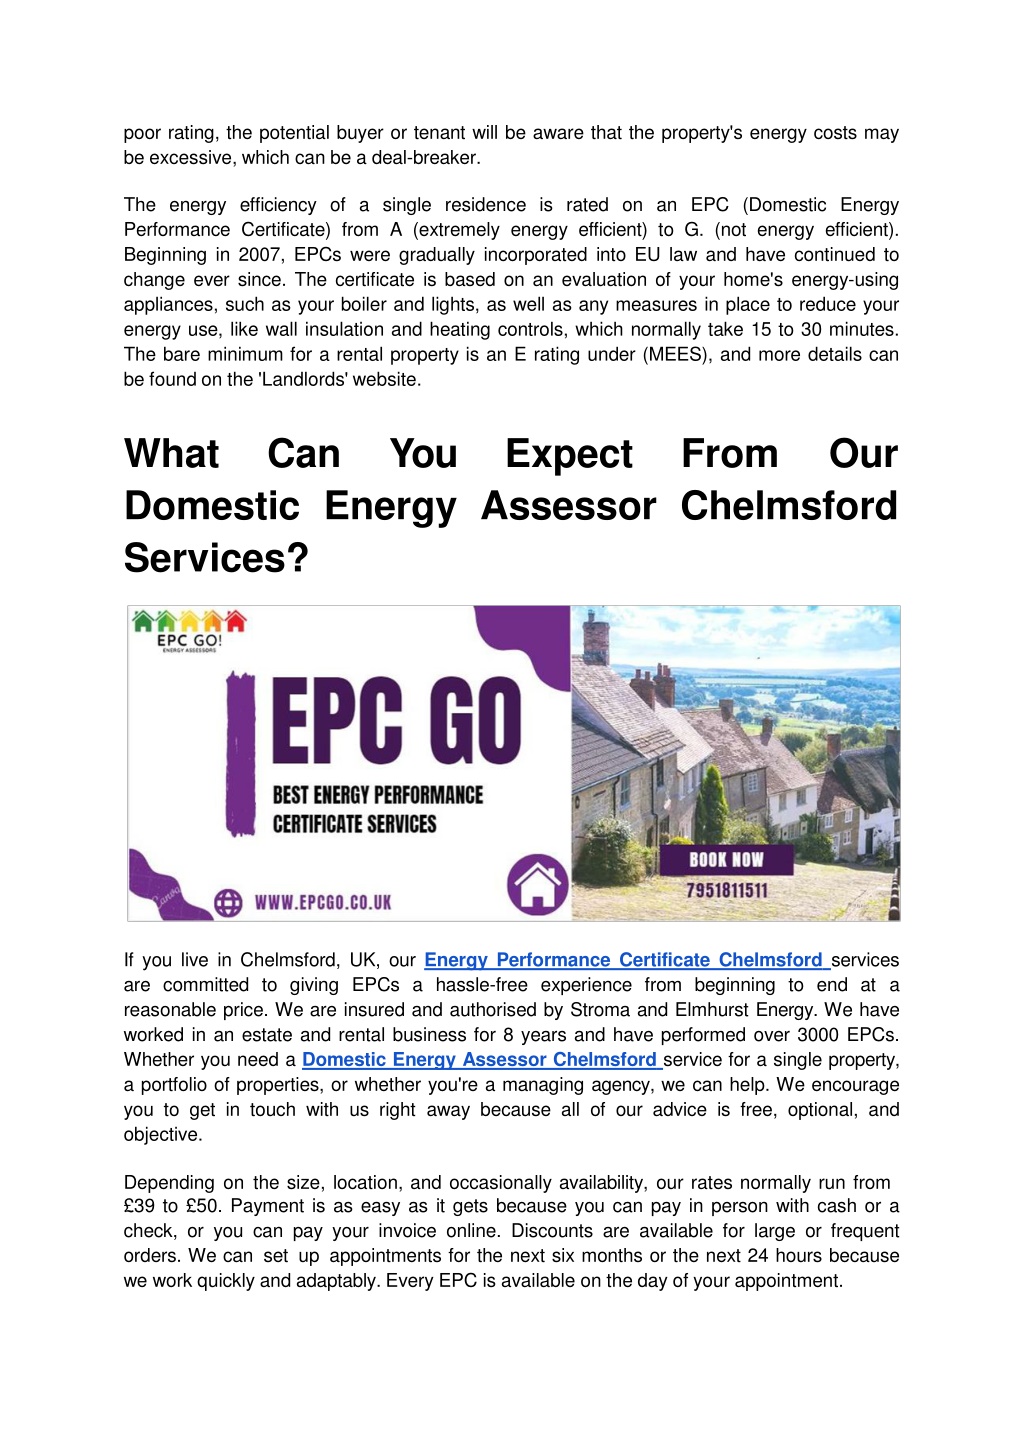 PPT The Best Energy Performance Certificate Chelmsford Services Are 